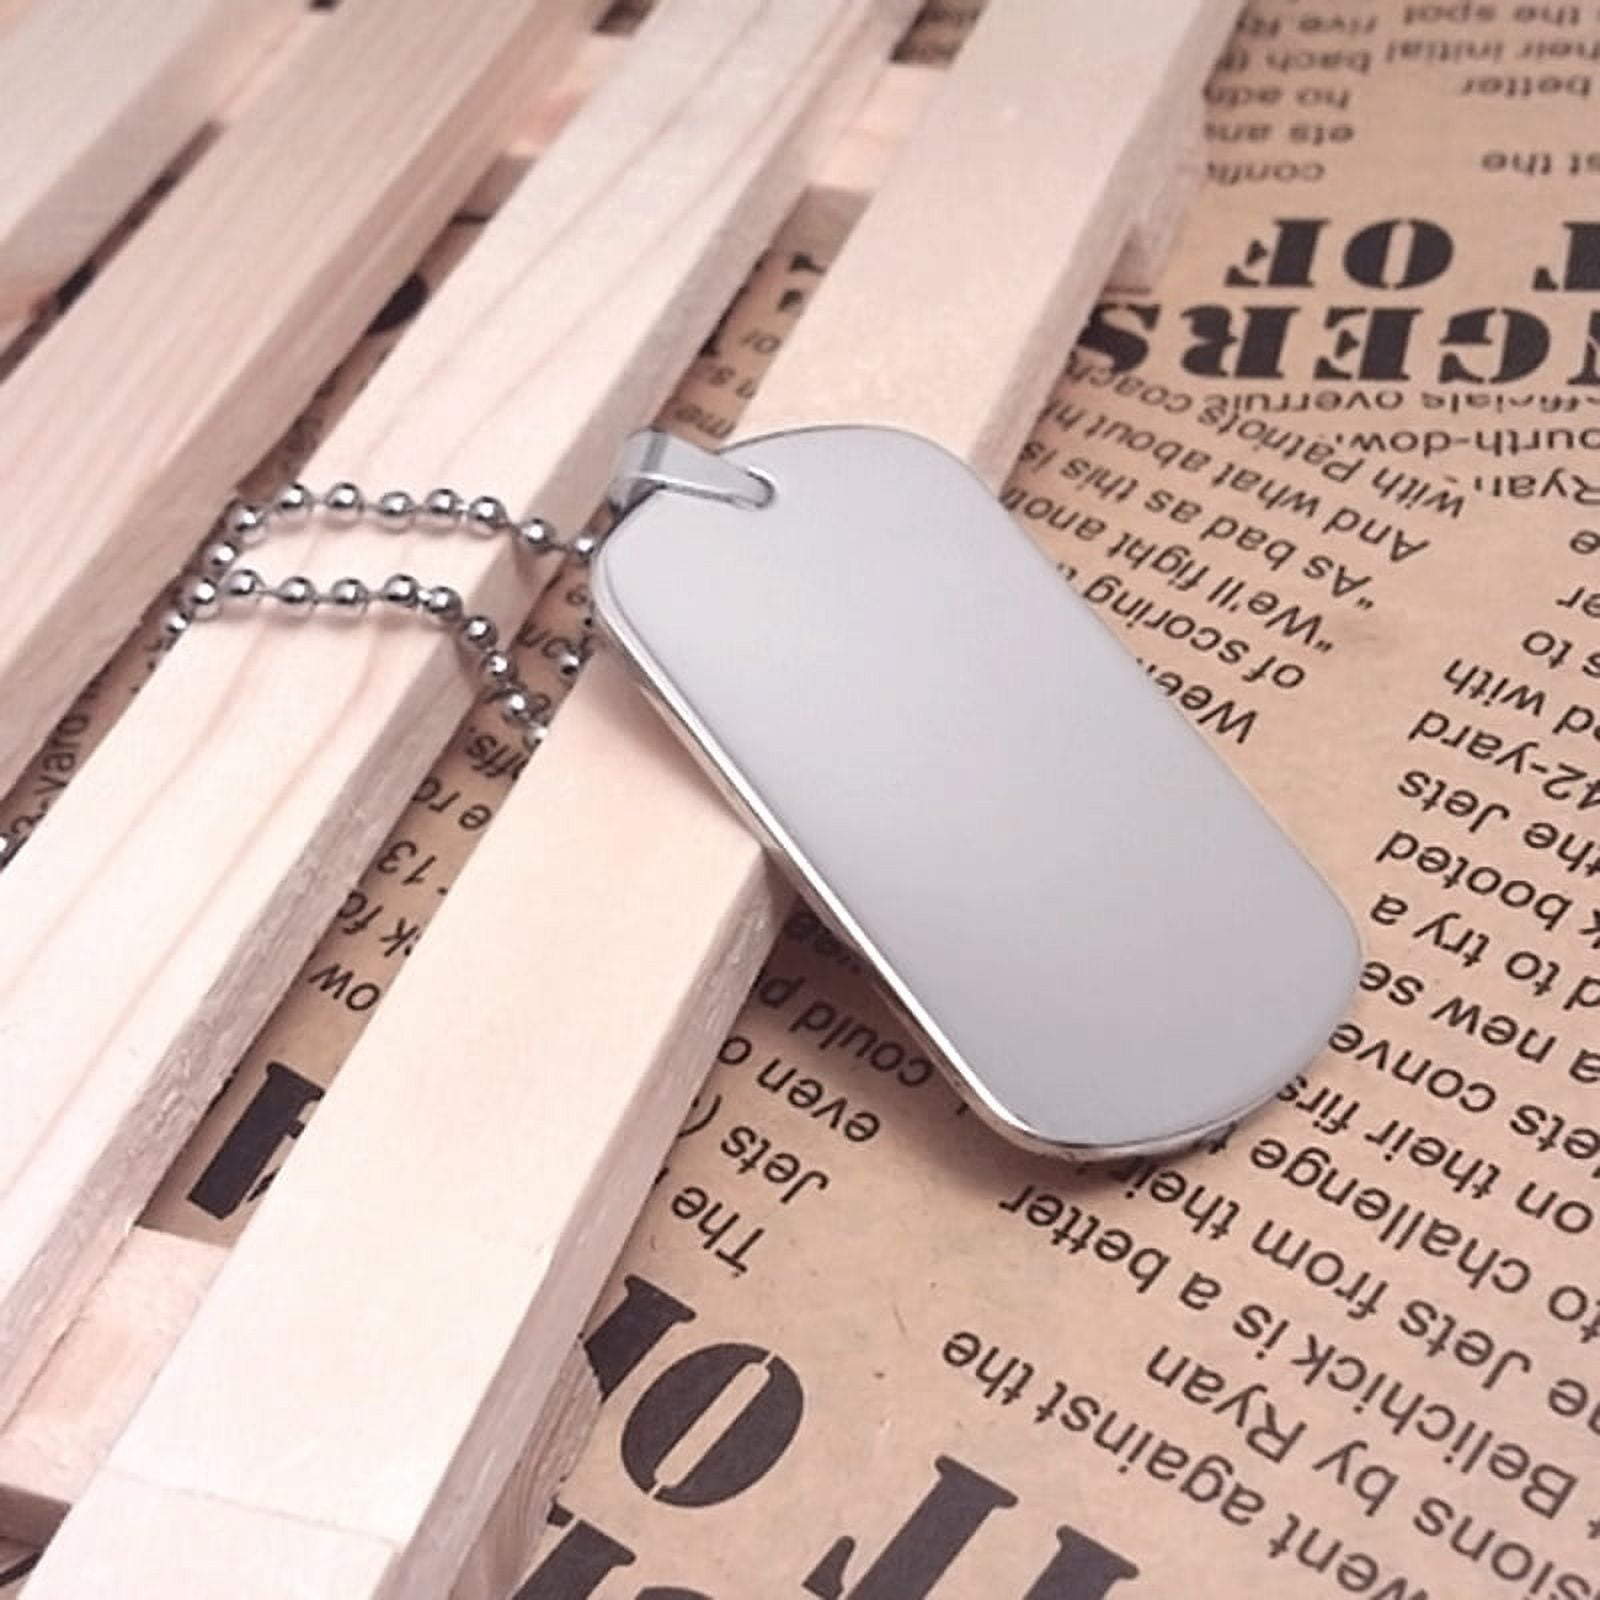 Men's Large Army Dog Tag Pendant Necklace Gold Steel Shot Bead 